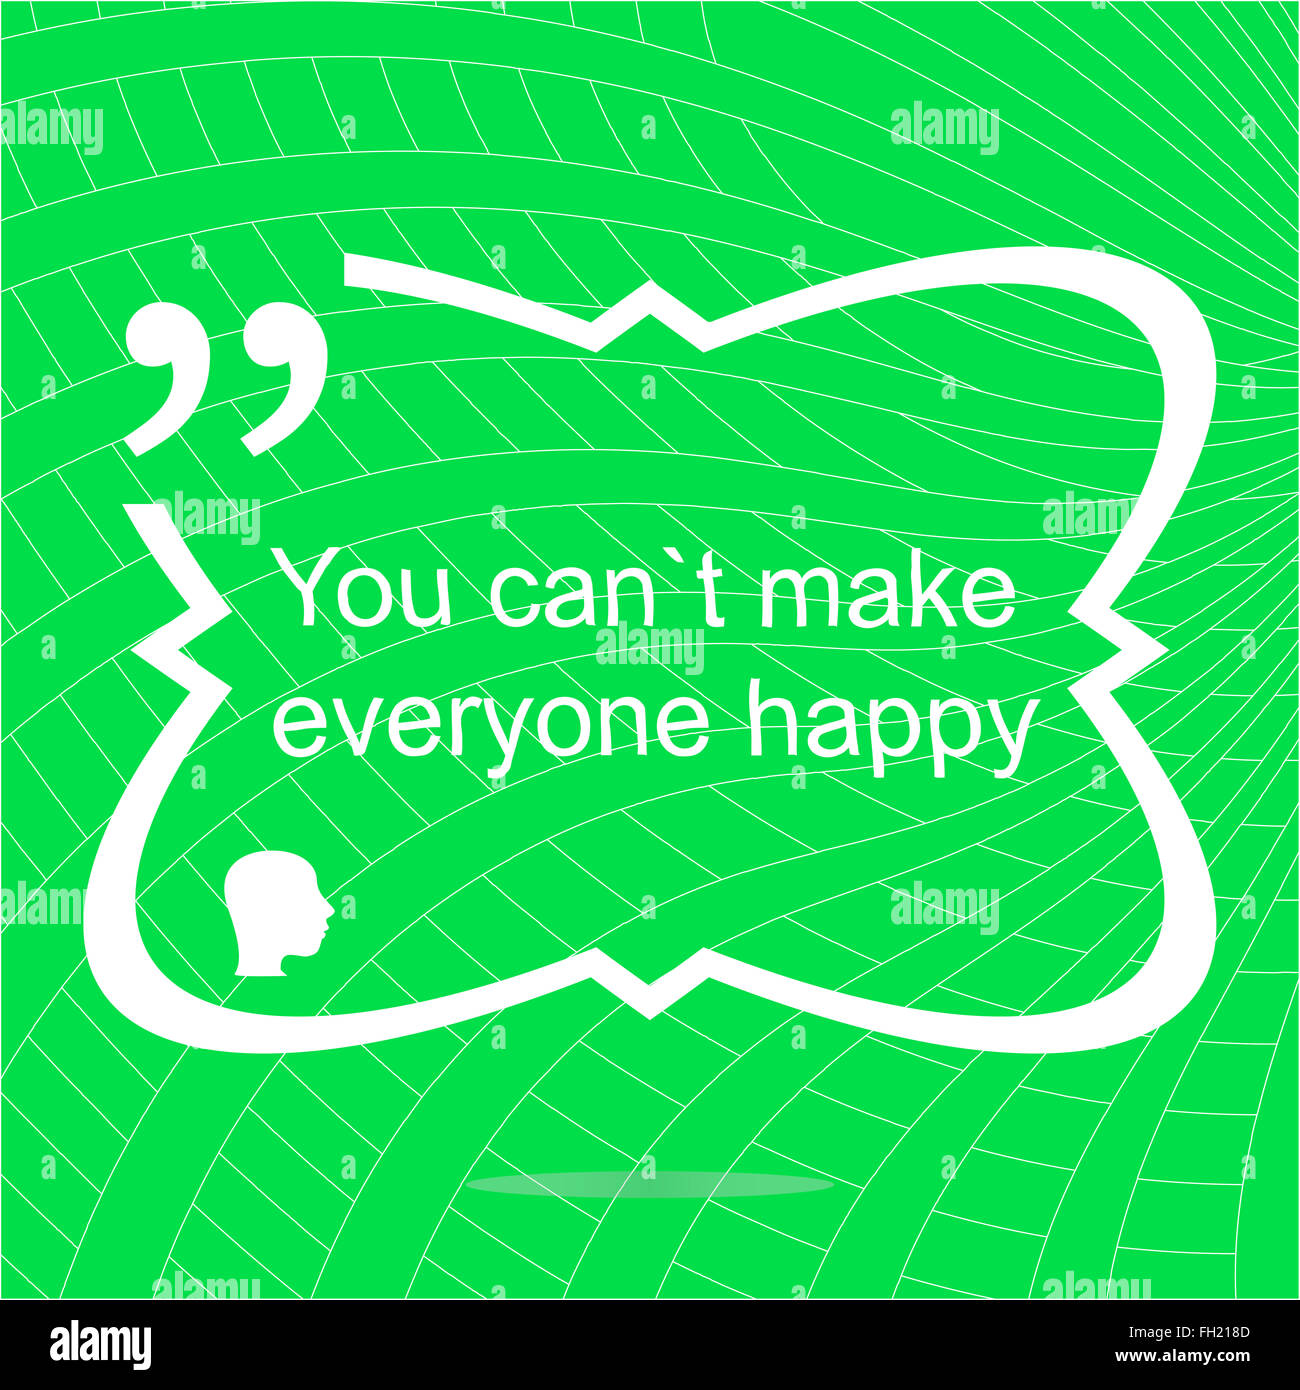 You cant make everyone happy. Inspirational motivational quote. Simple trendy design. Positive quote Stock Photo